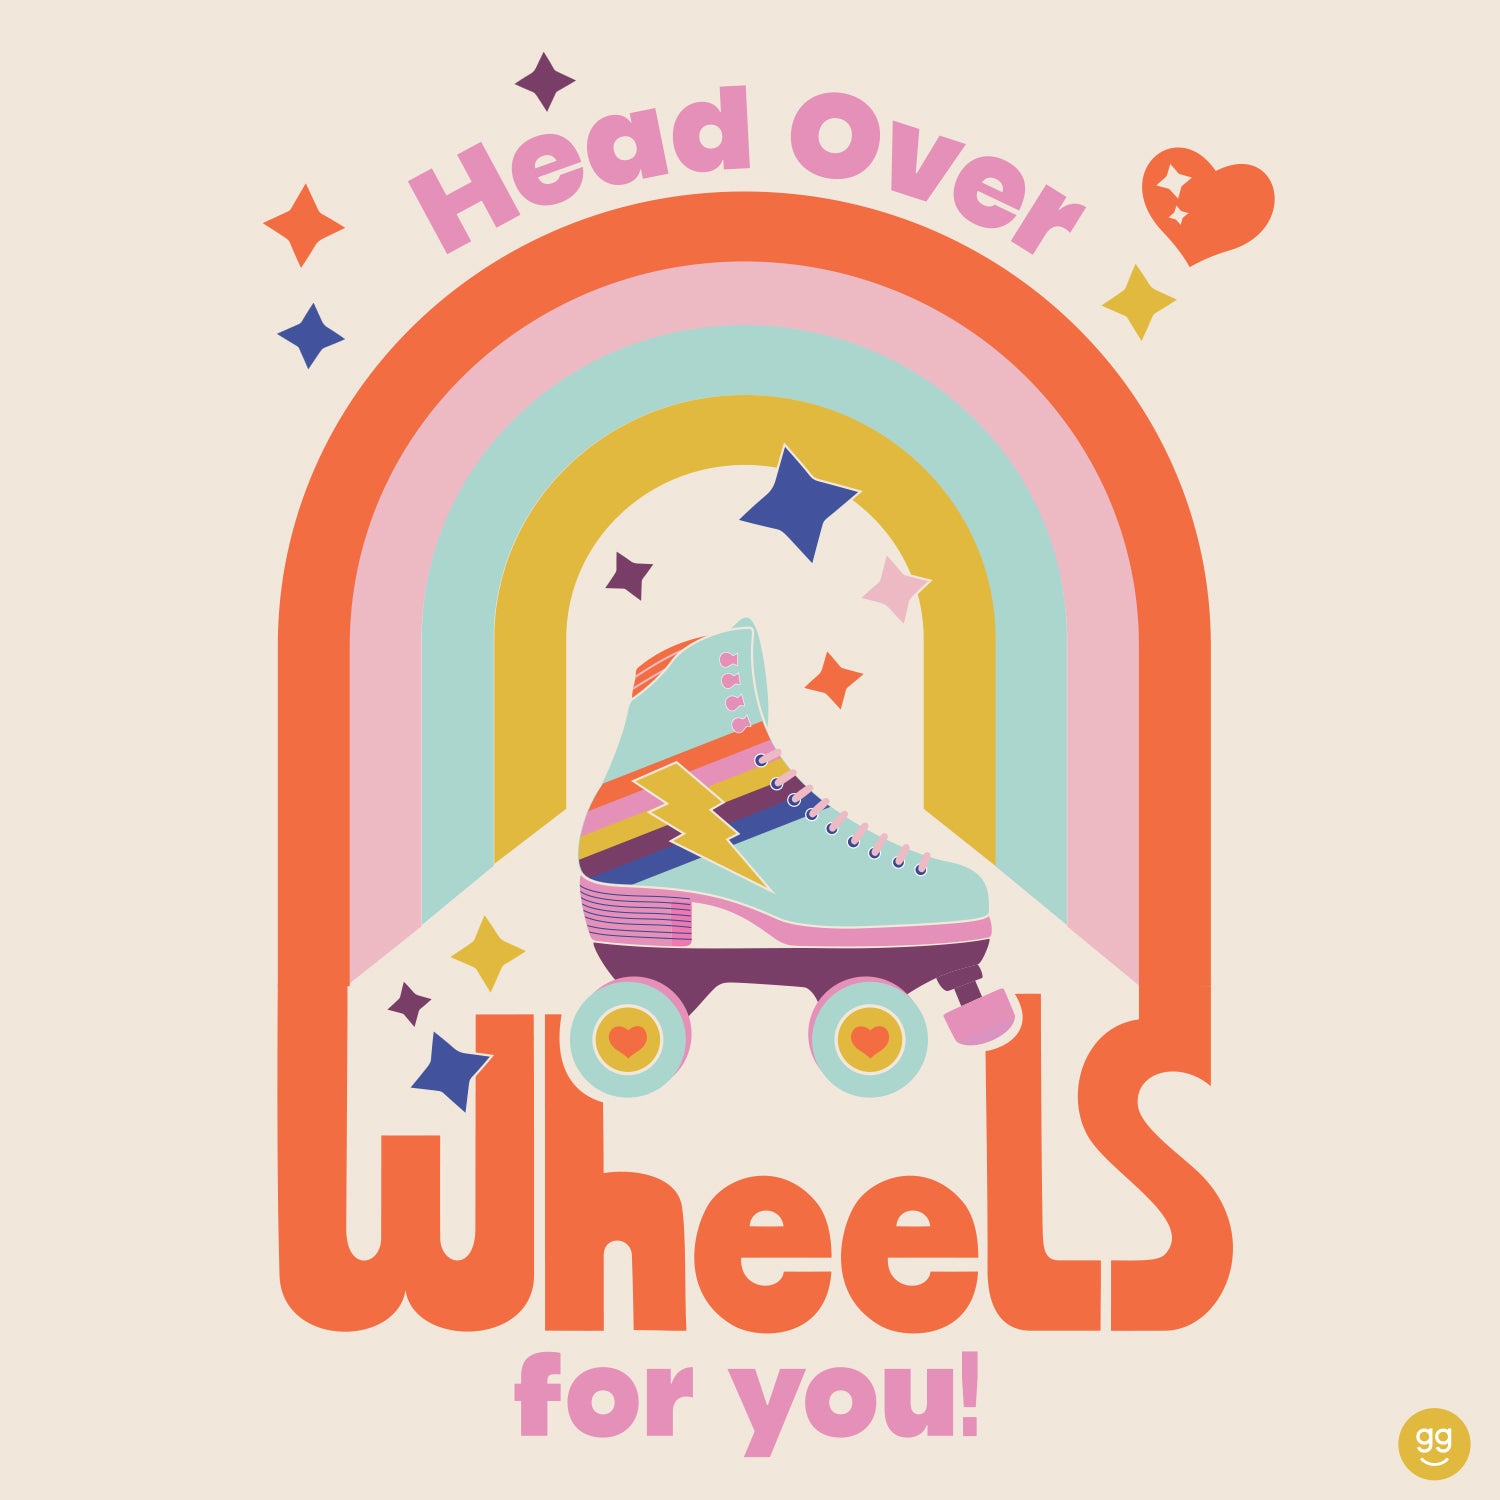 Head Over Wheels lettering artwork with roller skate and rainbow design by Gigglemugg